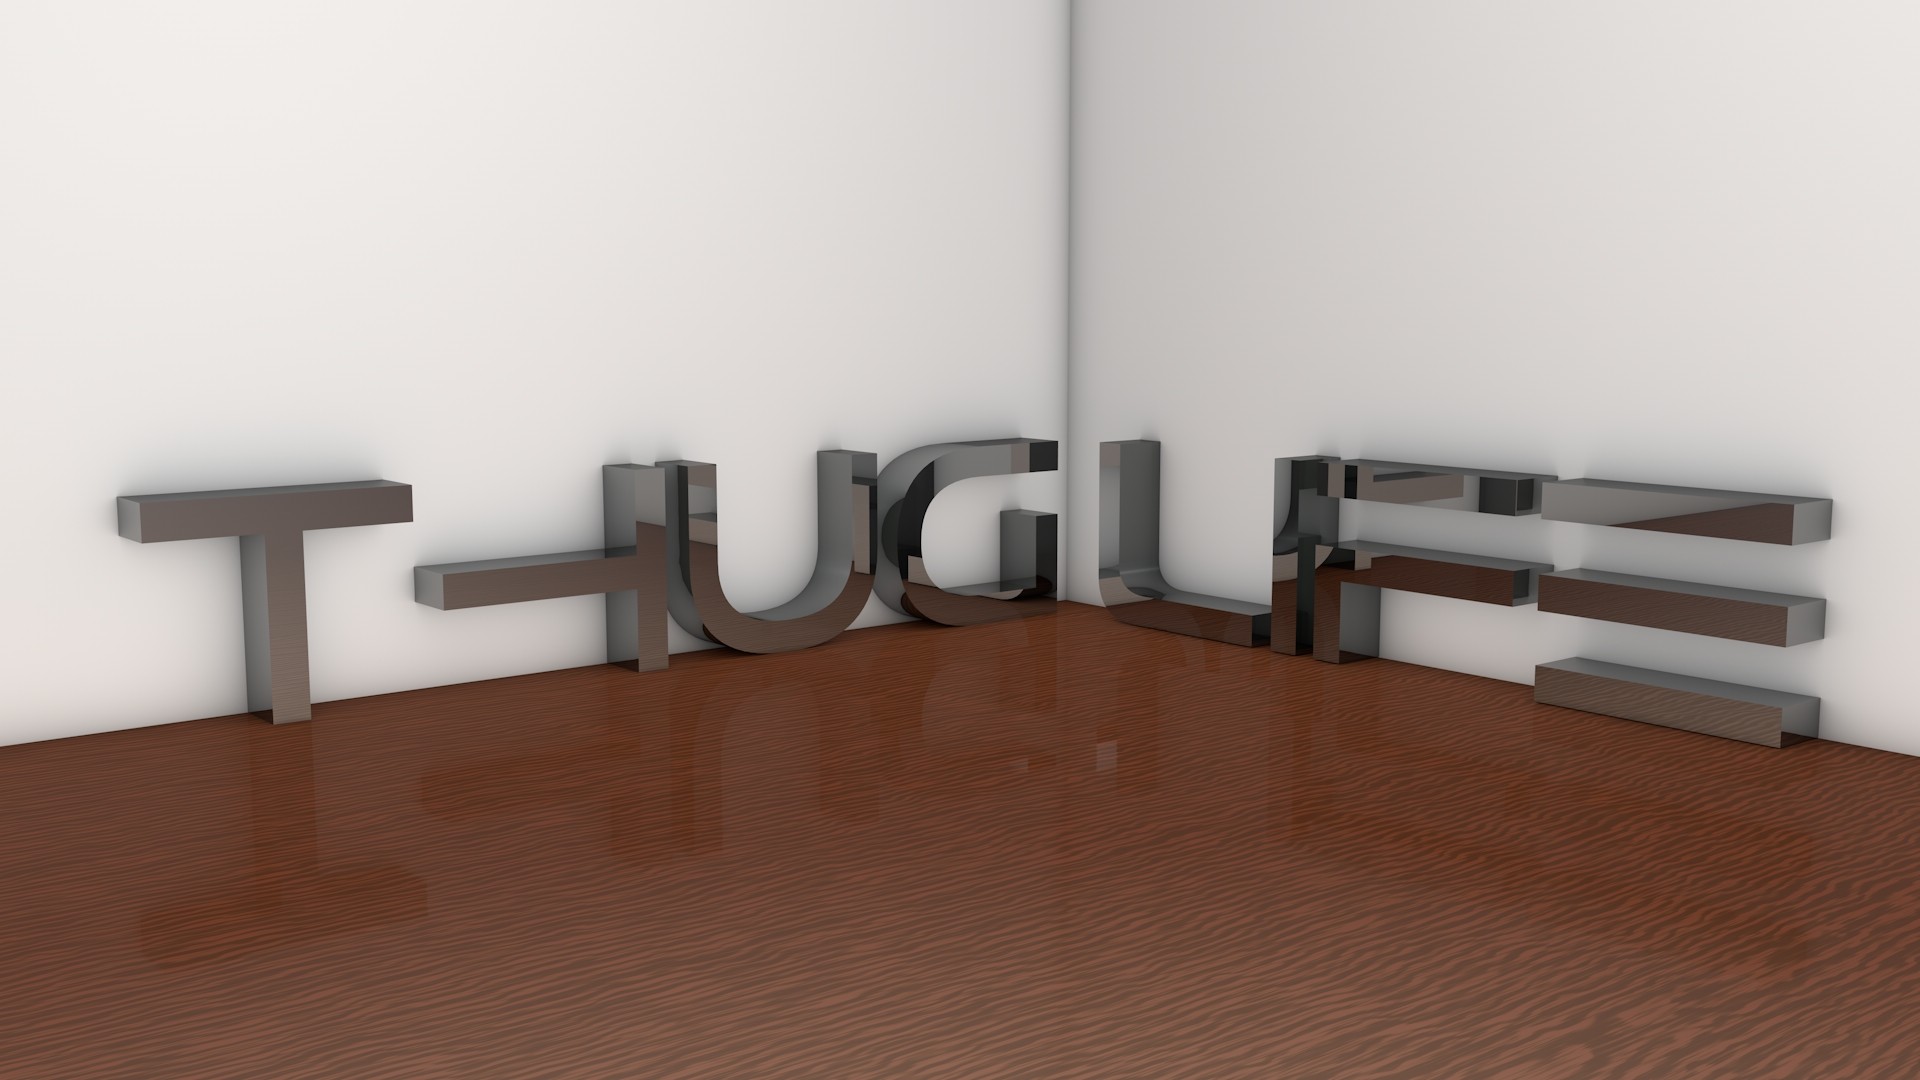 1920x1080 3D Thug Life by curtisblade 3D Thug Life by curtisblade